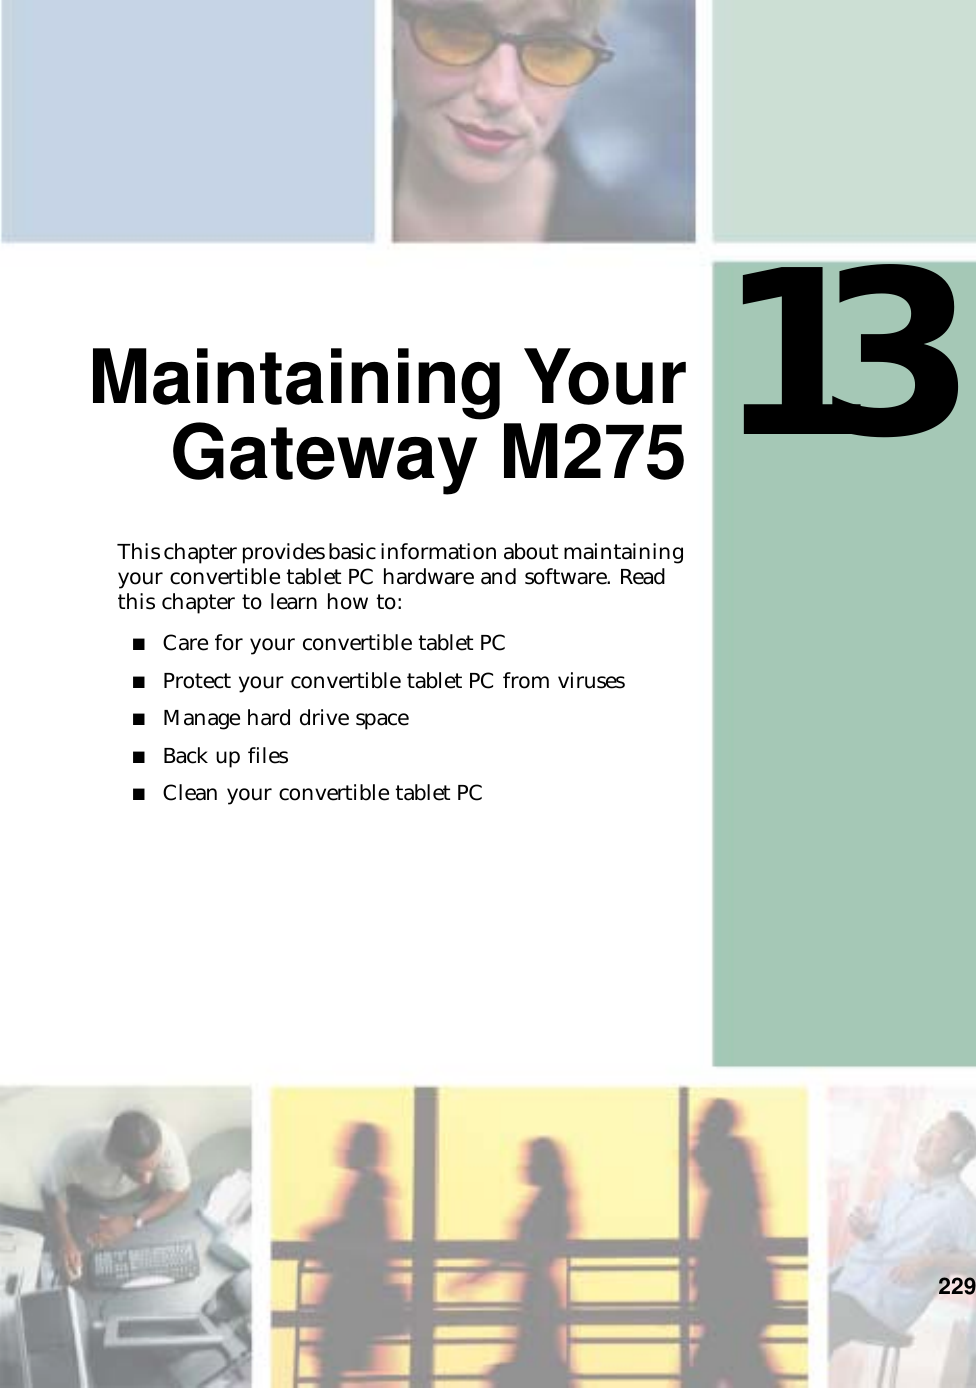 13229Maintaining YourGateway M275This chapter provides basic information about maintaining your convertible tablet PC hardware and software. Read this chapter to learn how to:■Care for your convertible tablet PC■Protect your convertible tablet PC from viruses■Manage hard drive space■Back up files■Clean your convertible tablet PC